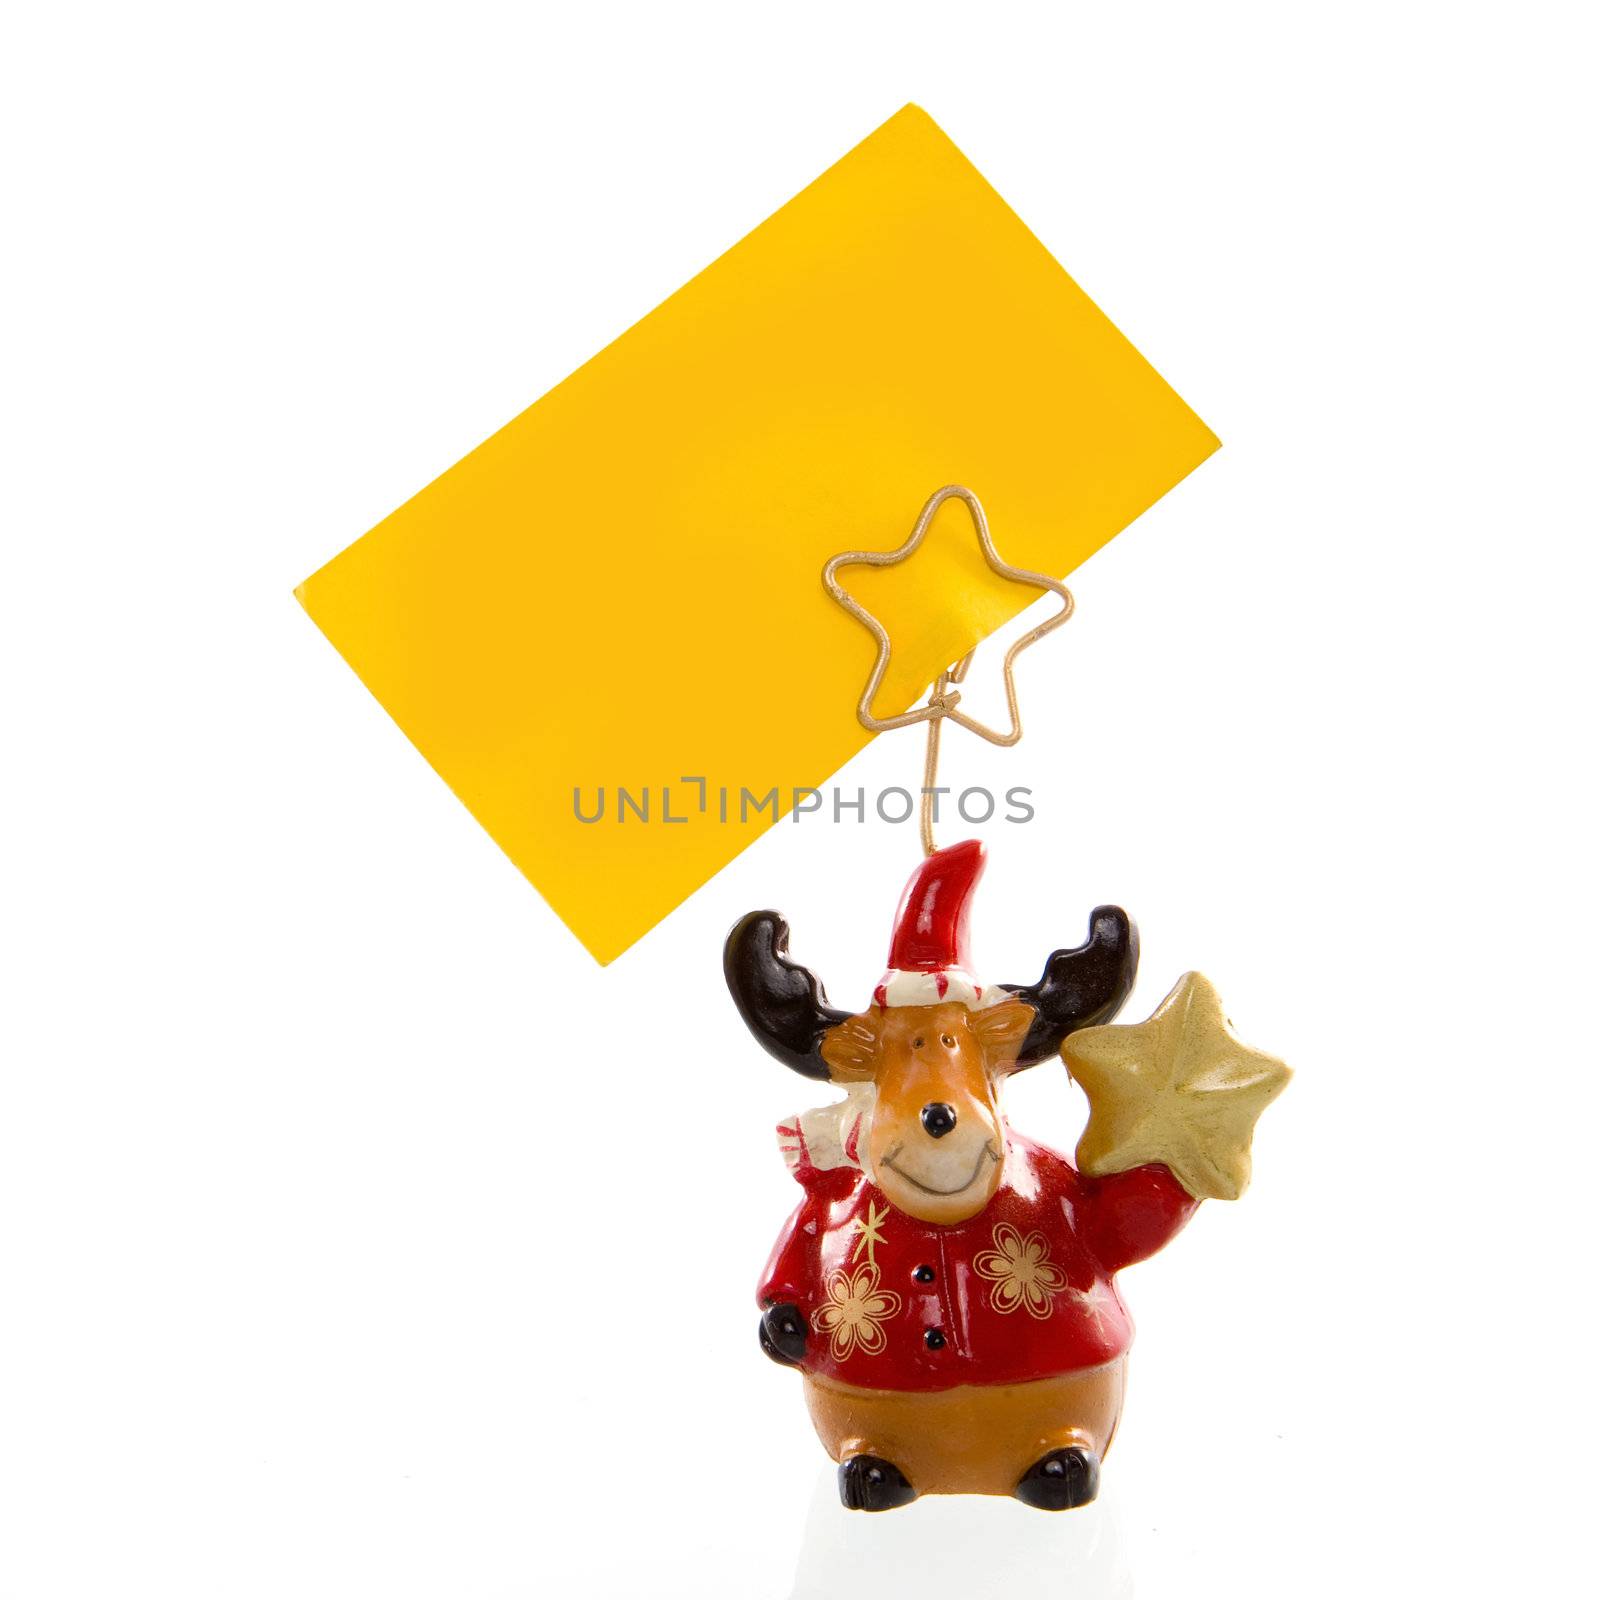 rudolph the red nose reindeer with a yellow sign on a white background